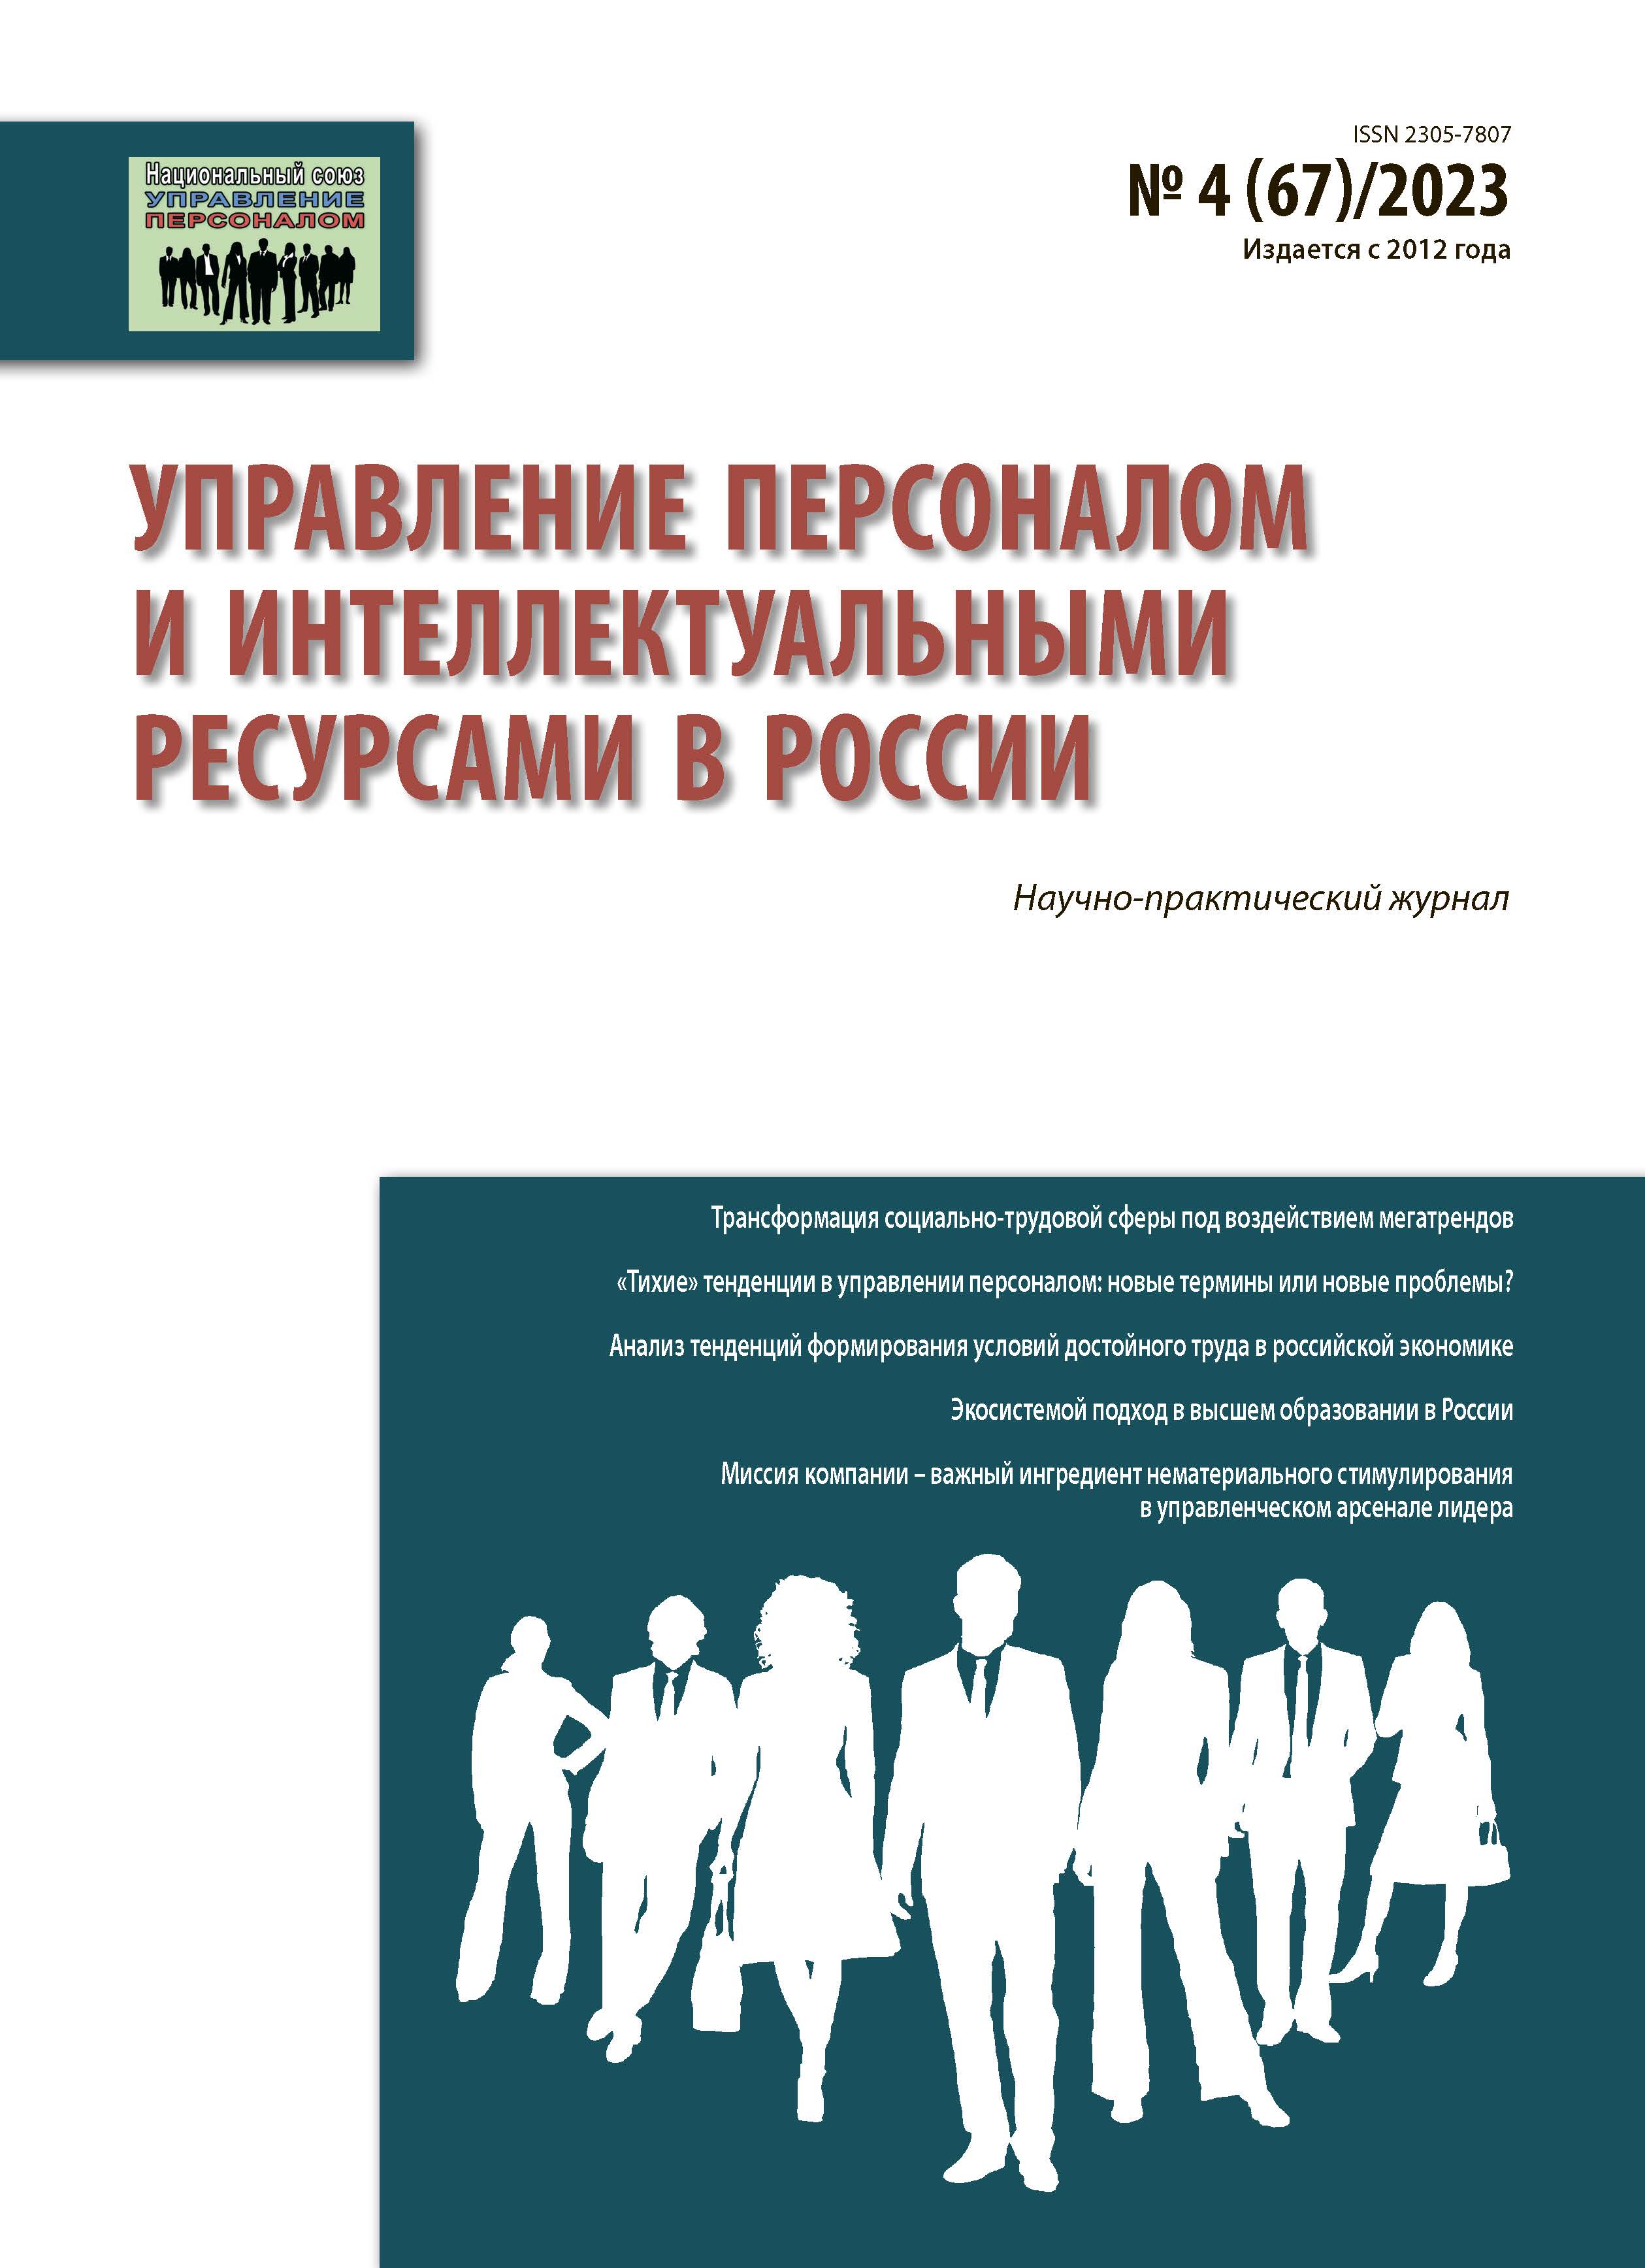                         TRENDS AND PROBLEMS OF HUMAN RESOURCES DEVELOPMENT:  THE ECOSYSTEM OF THE PERSONNEL APPROACH
            